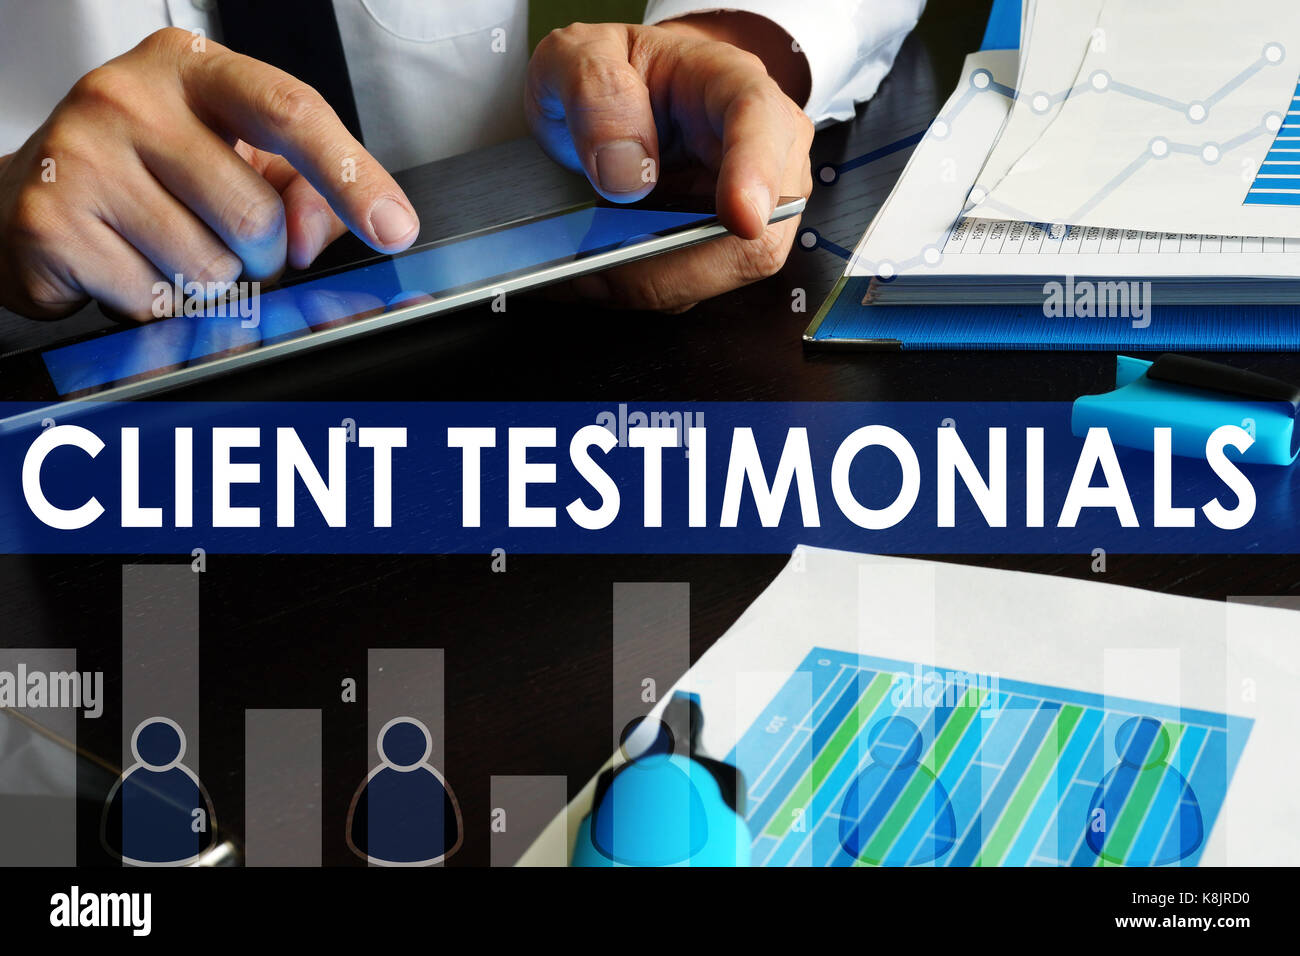 Client testimonials concept. Manager is holding tablet. Stock Photo